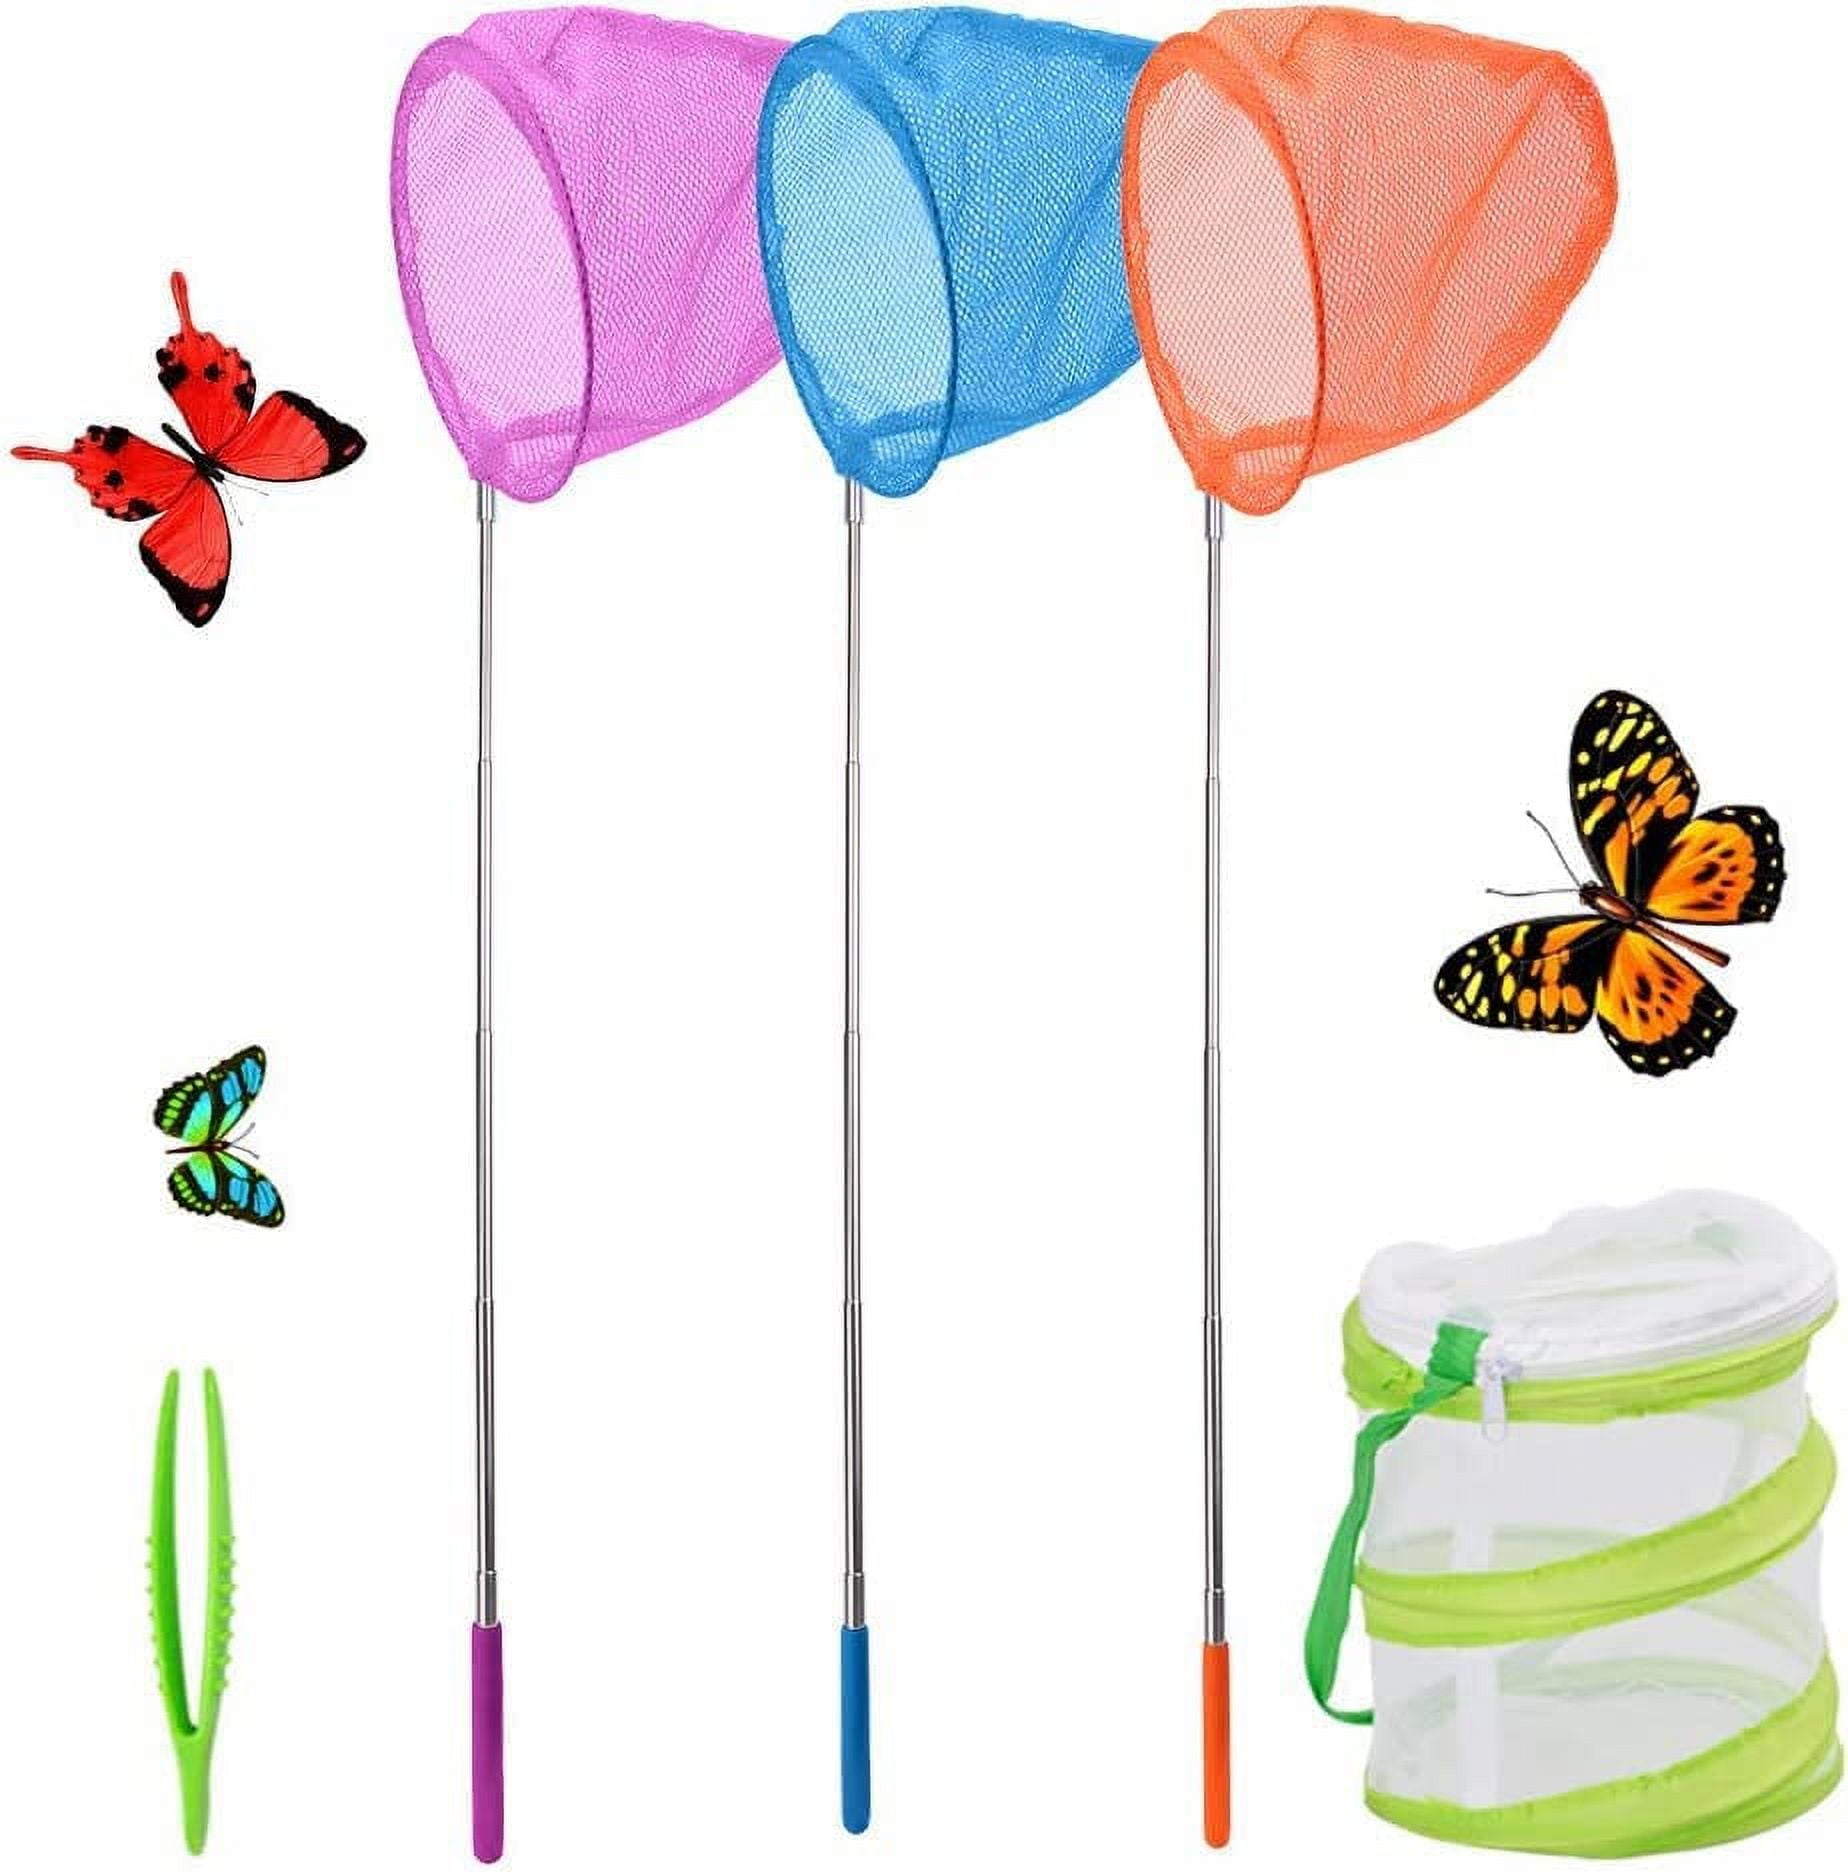 3pcs Kids Outdoor Insect Bug Trap Butterfly Catching Net Fishing Accessory  Toy Intelligence Develop Toy - Biology - AliExpress